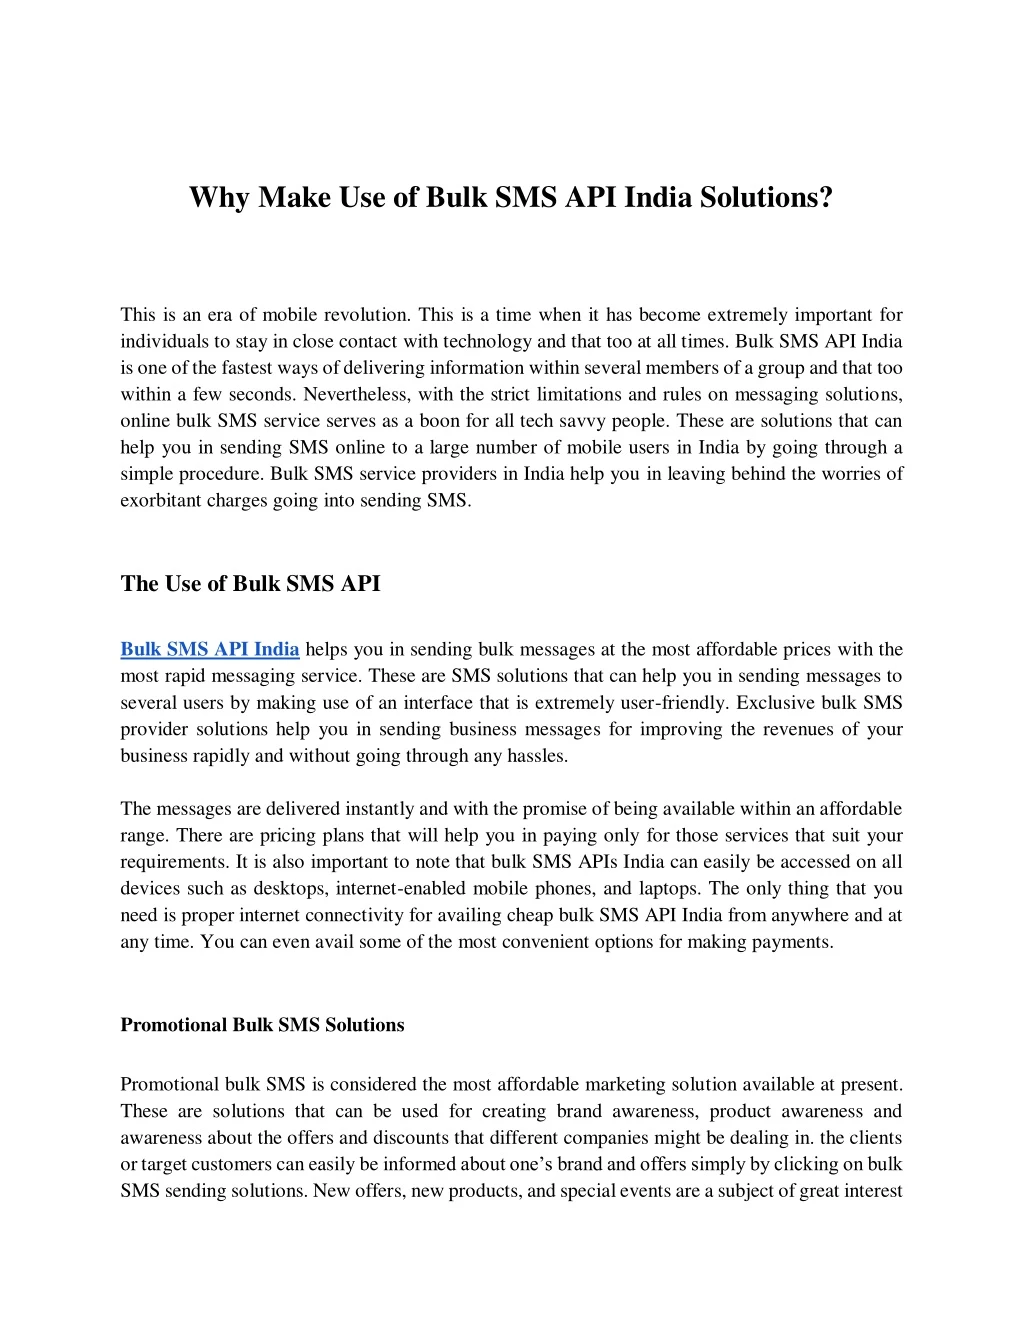 why make use of bulk sms api india solutions this